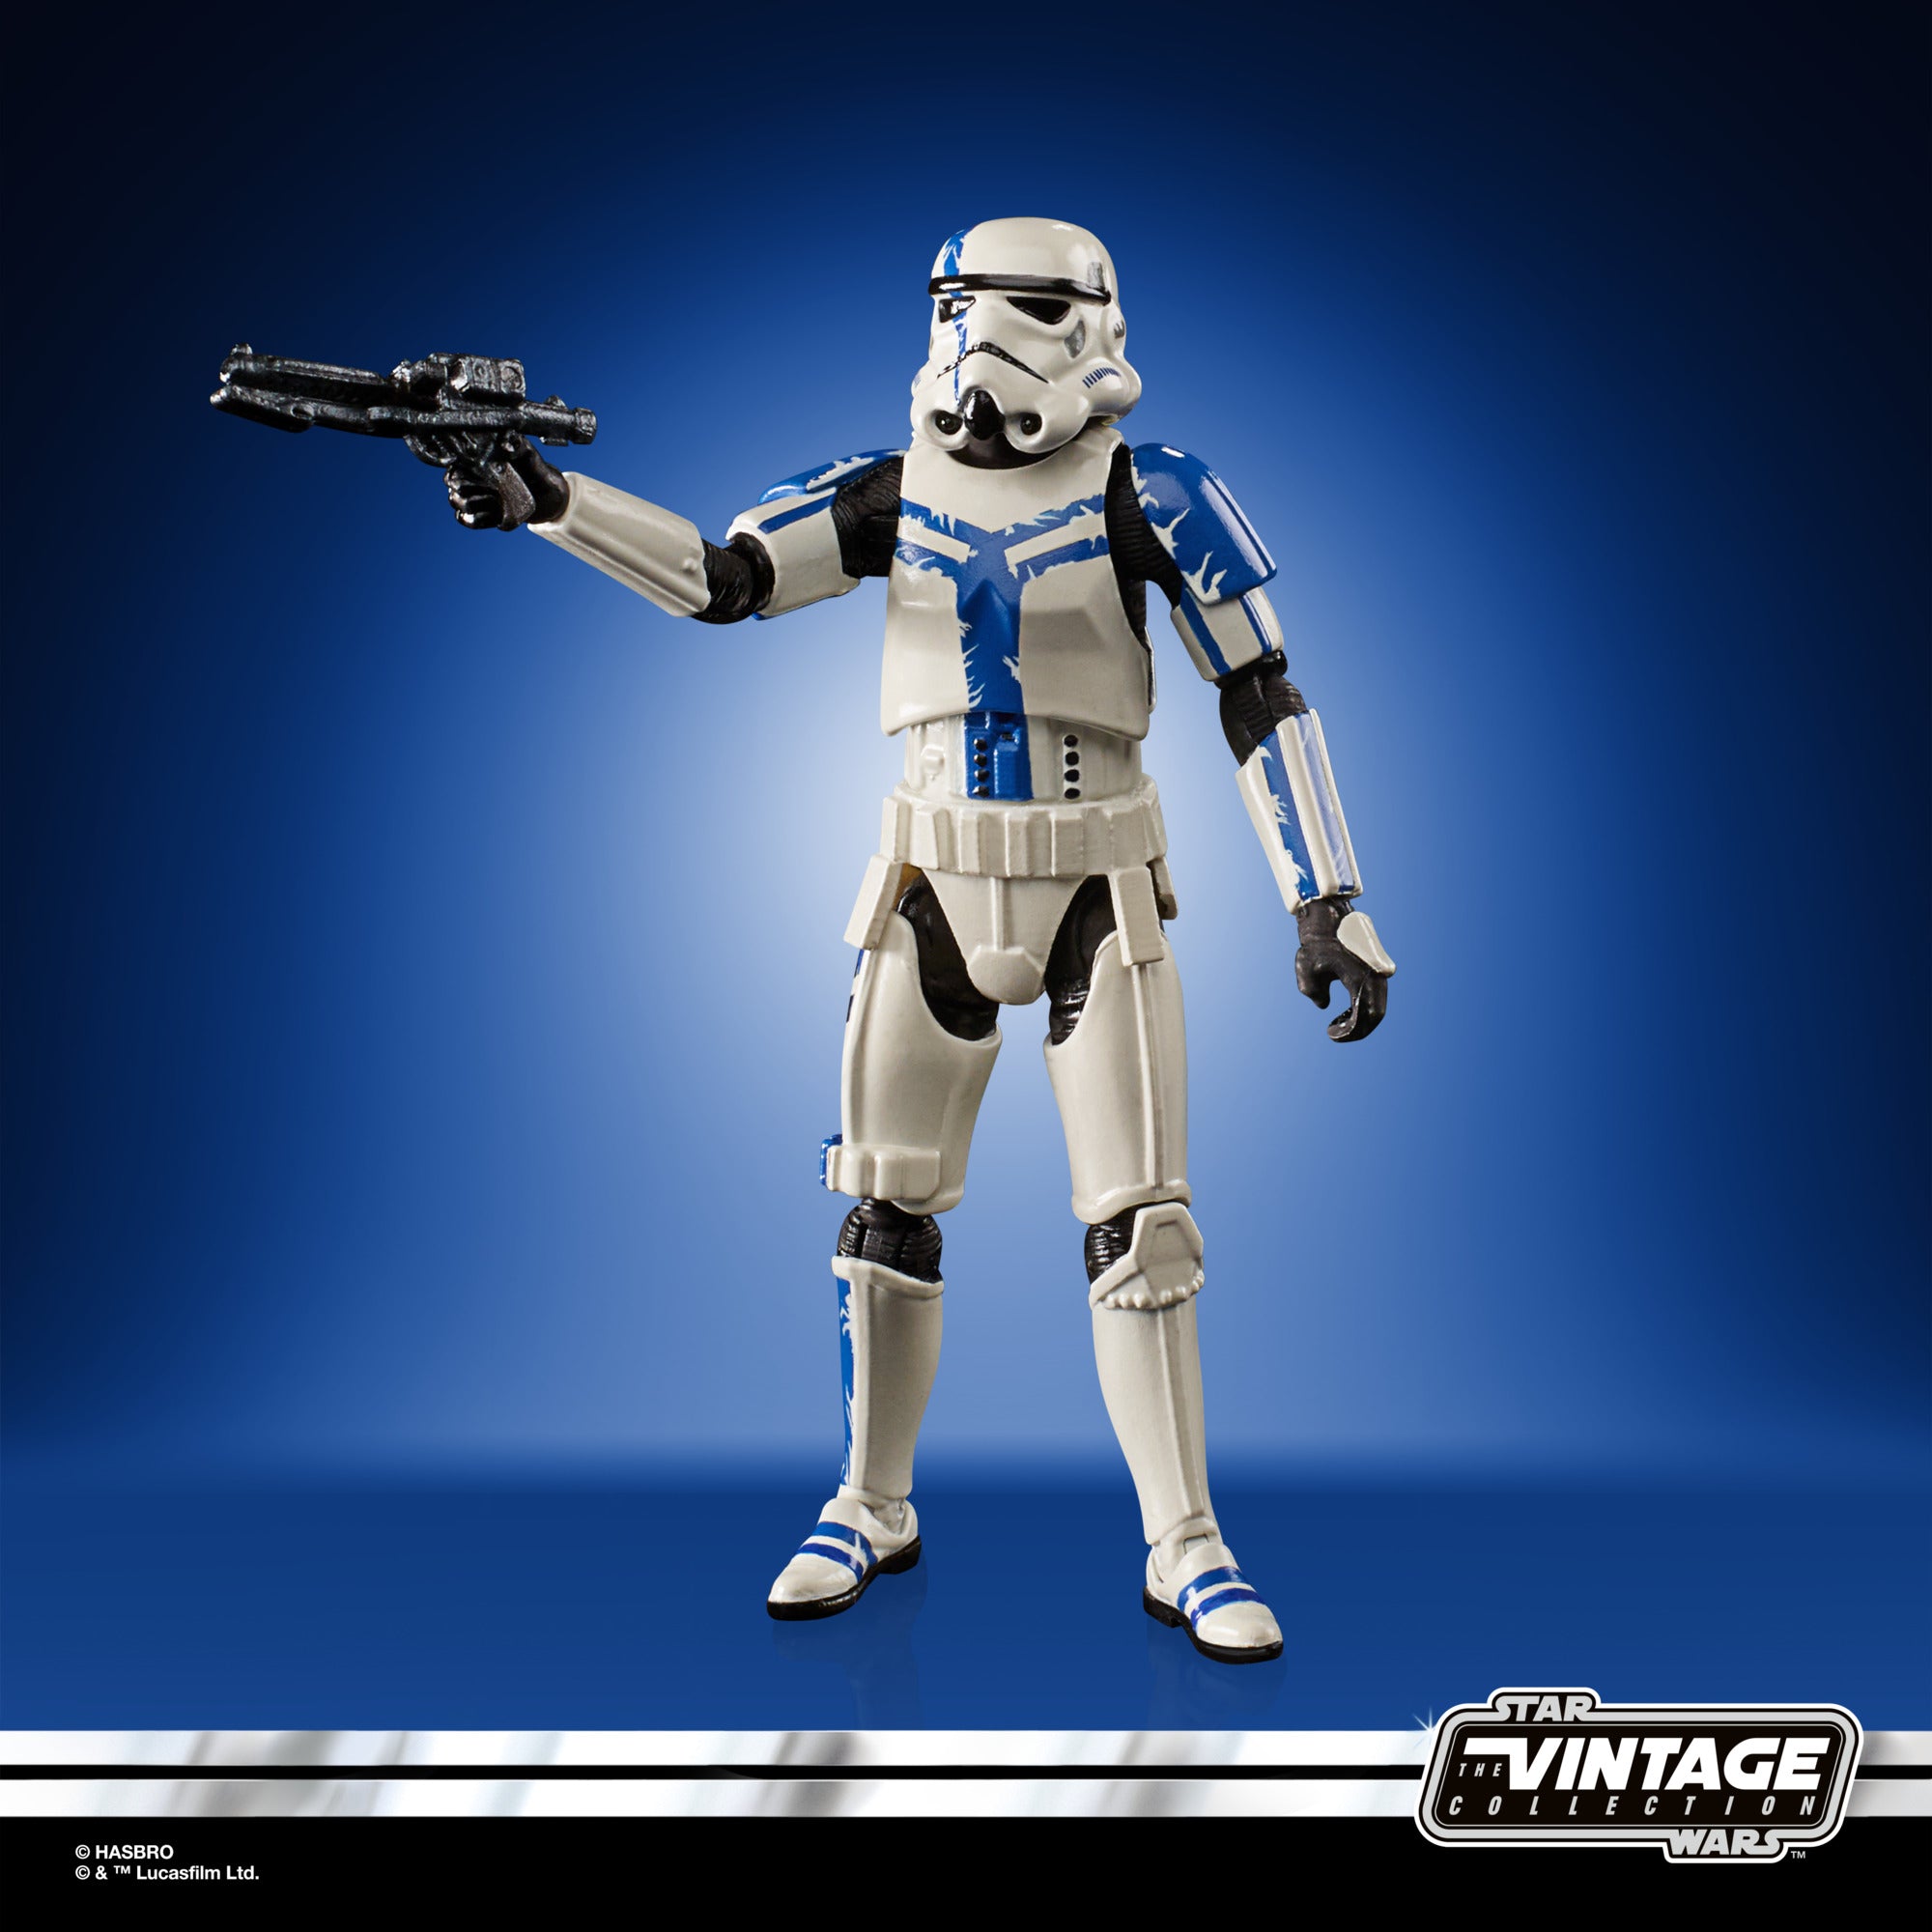 Minifig: Space Wars Unleashed Blue Warrior